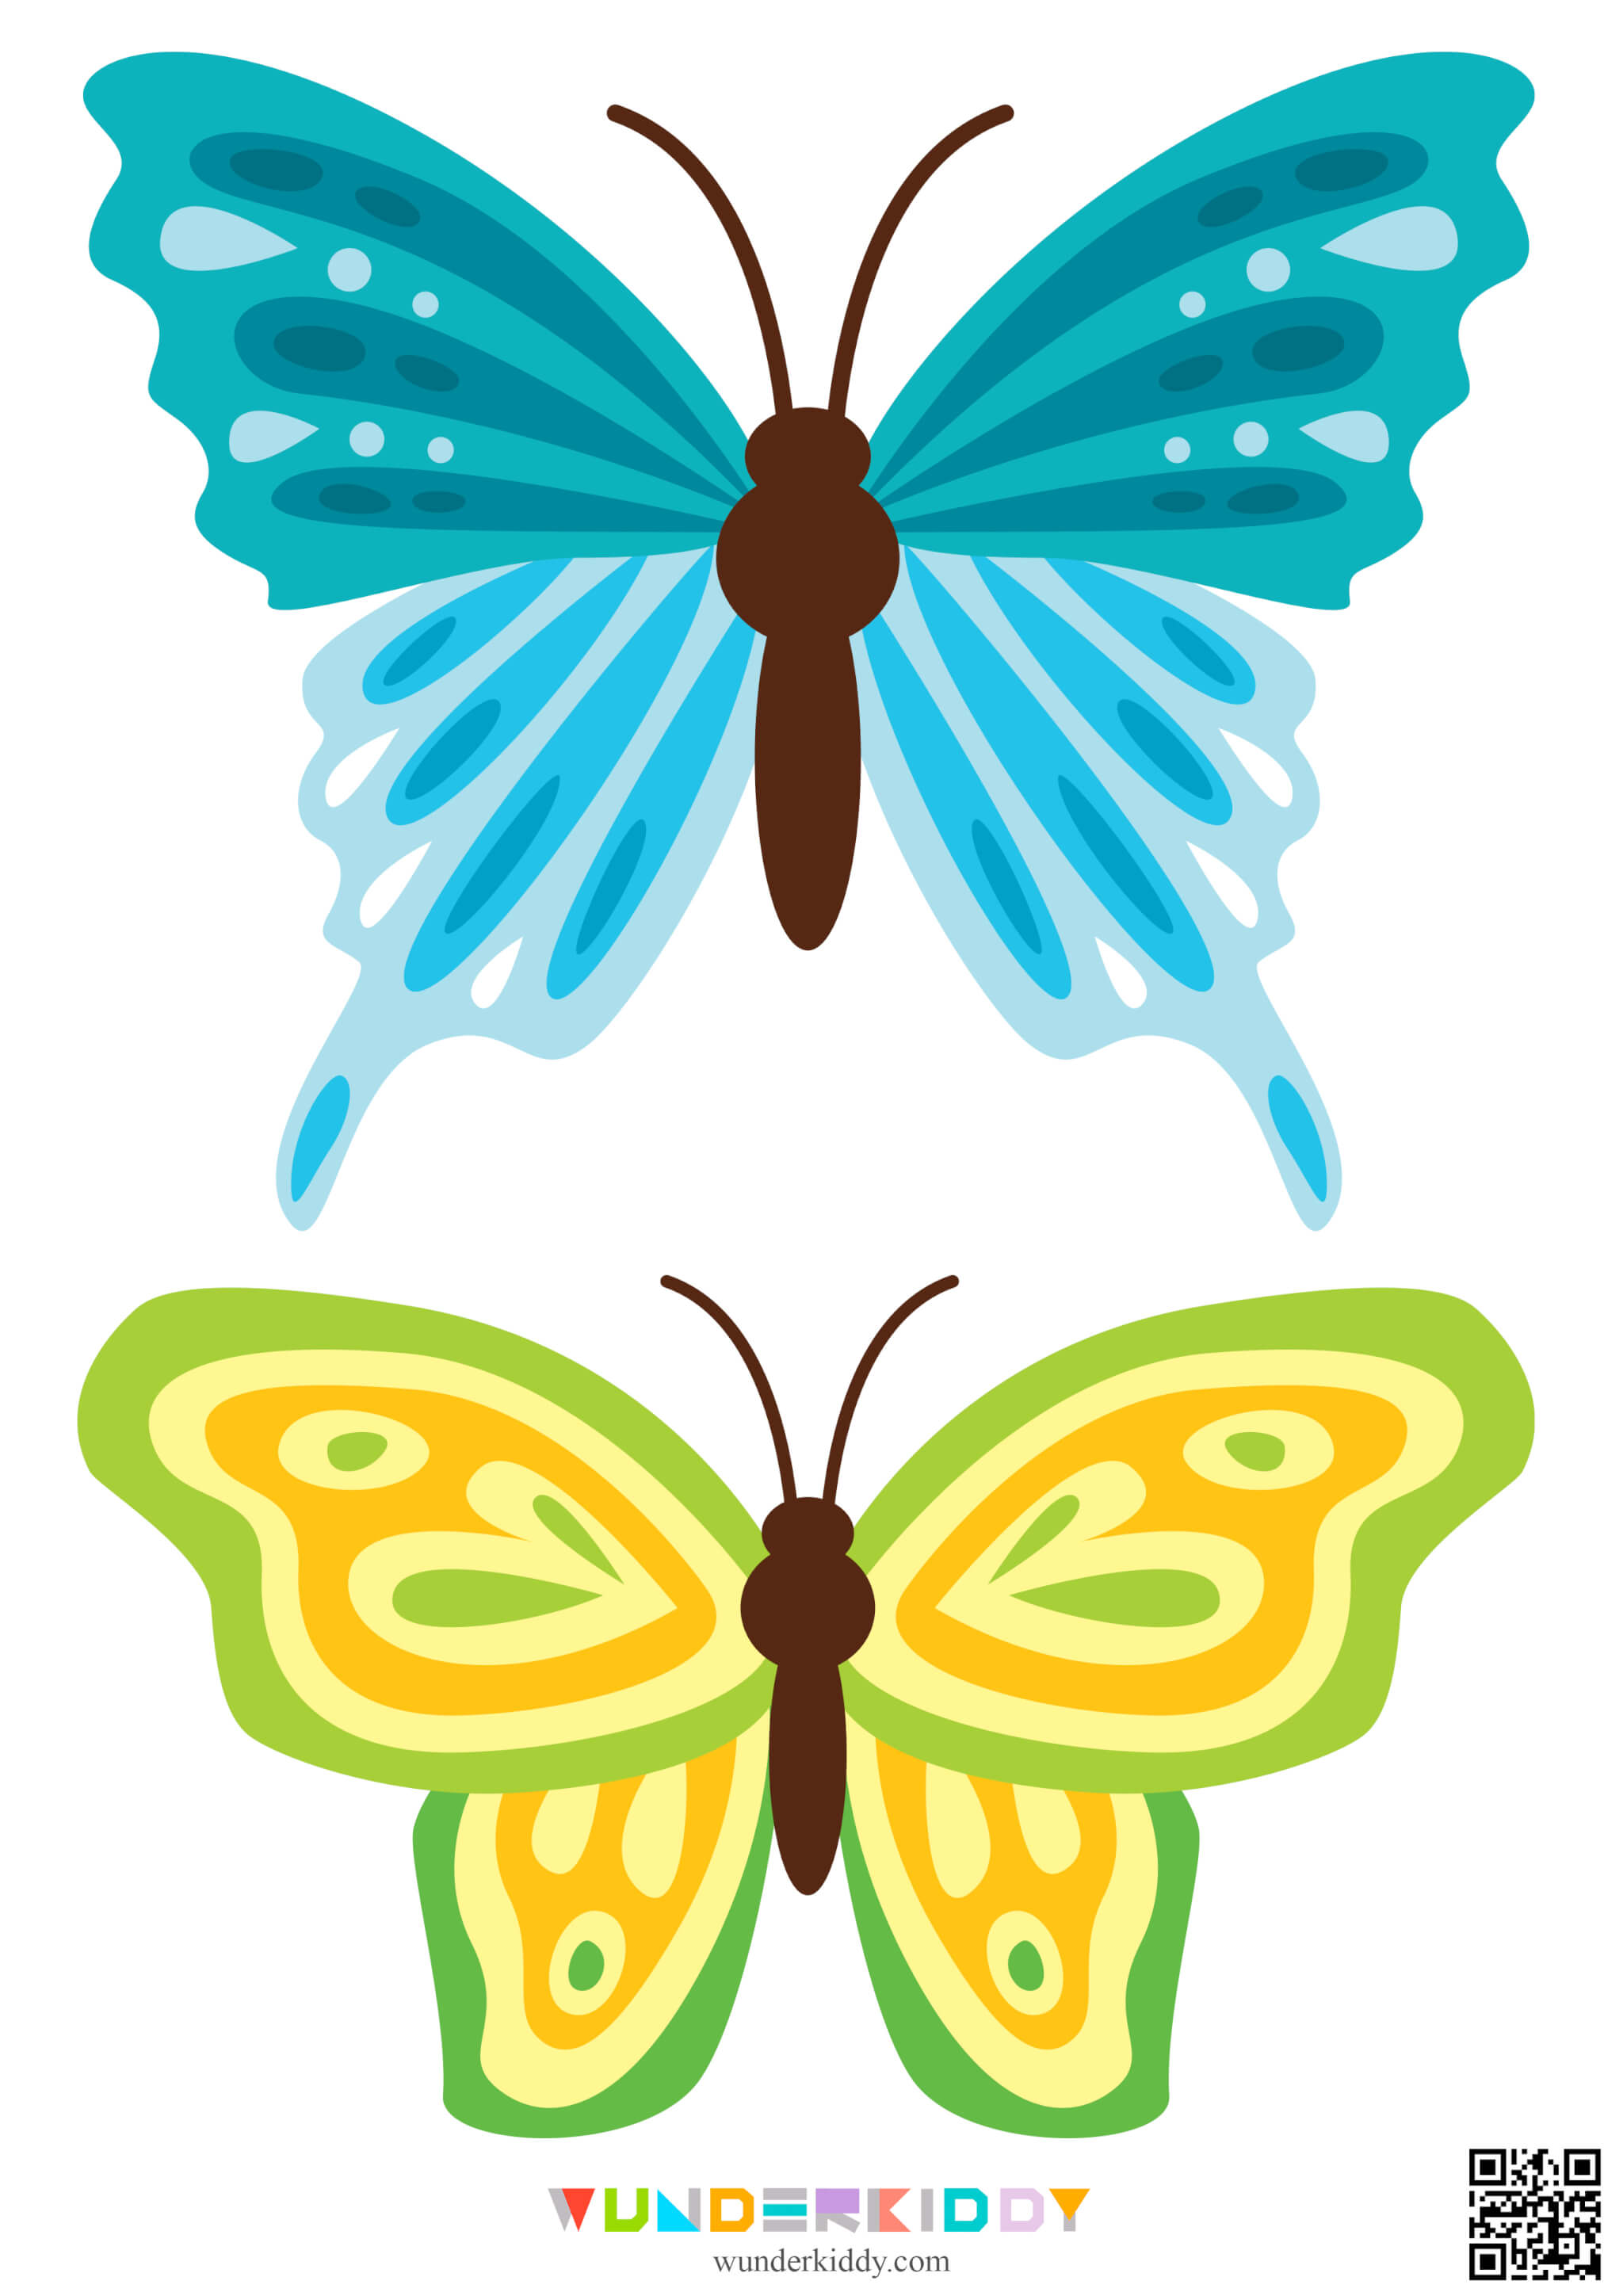 Template «Butterfly» - Image 8